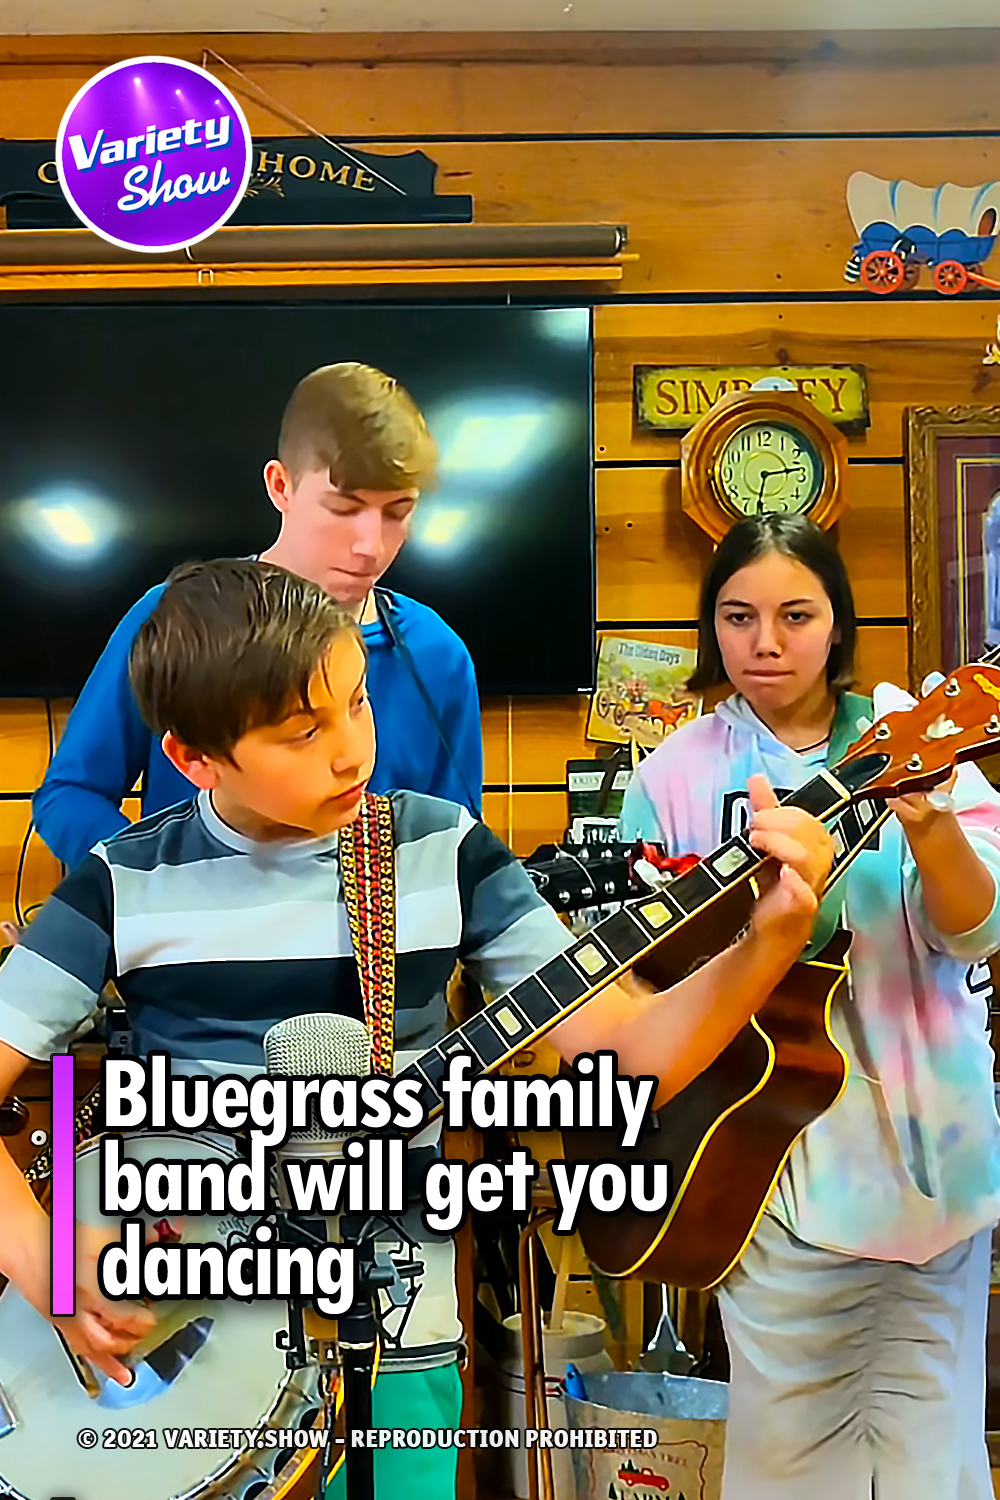 Bluegrass family band will get you dancing